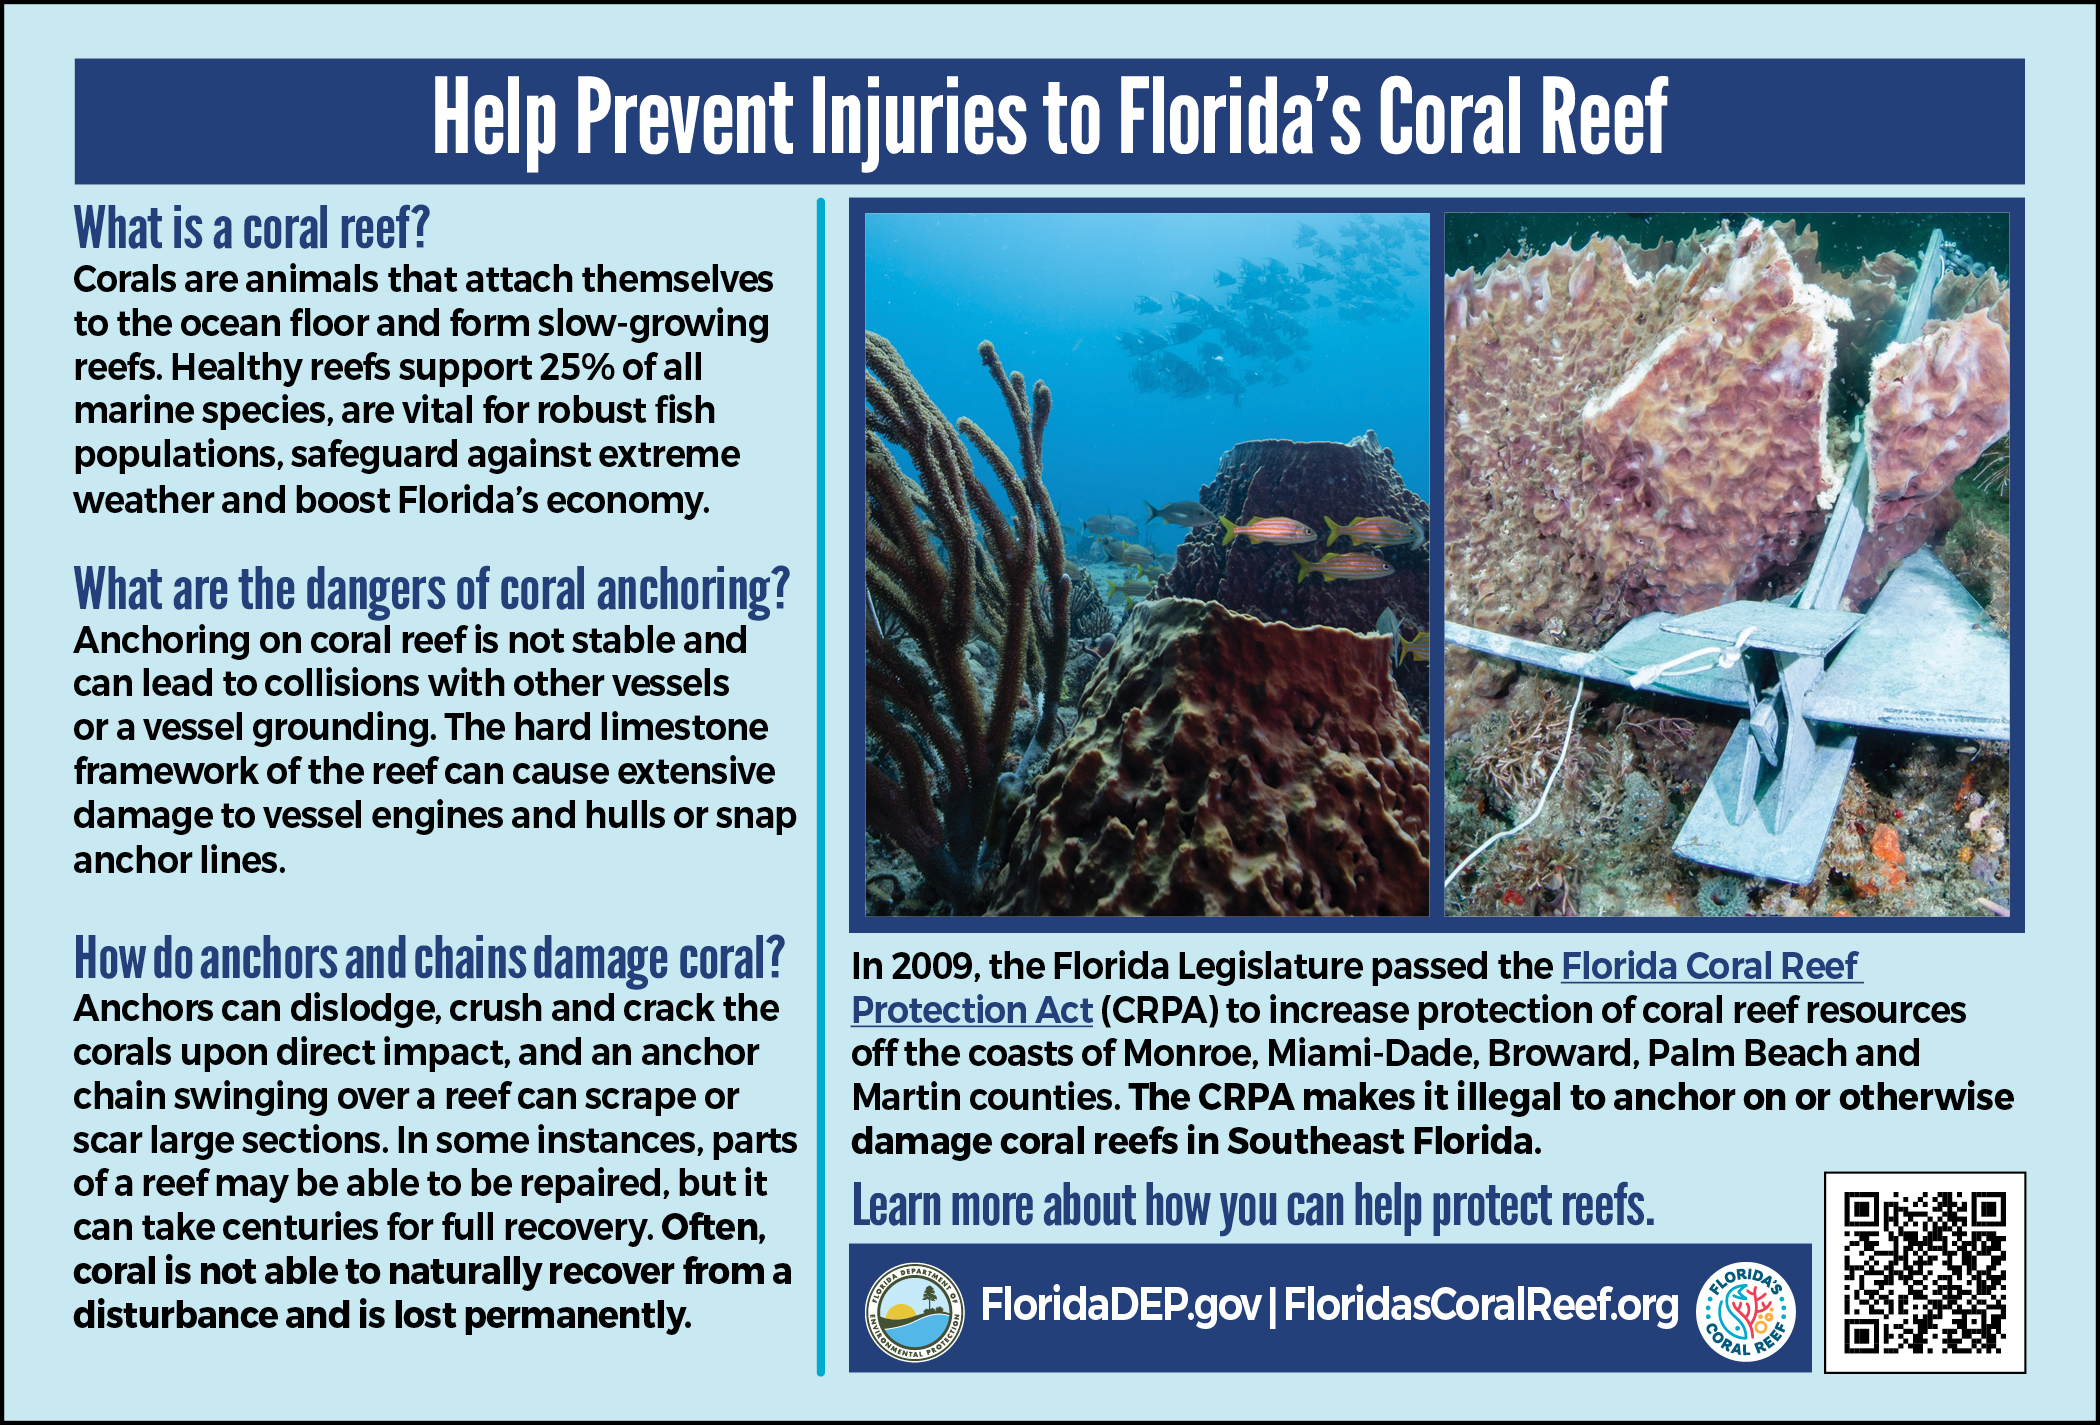 Help Prevent Injuries to Florida's Coral Reef, half page ad